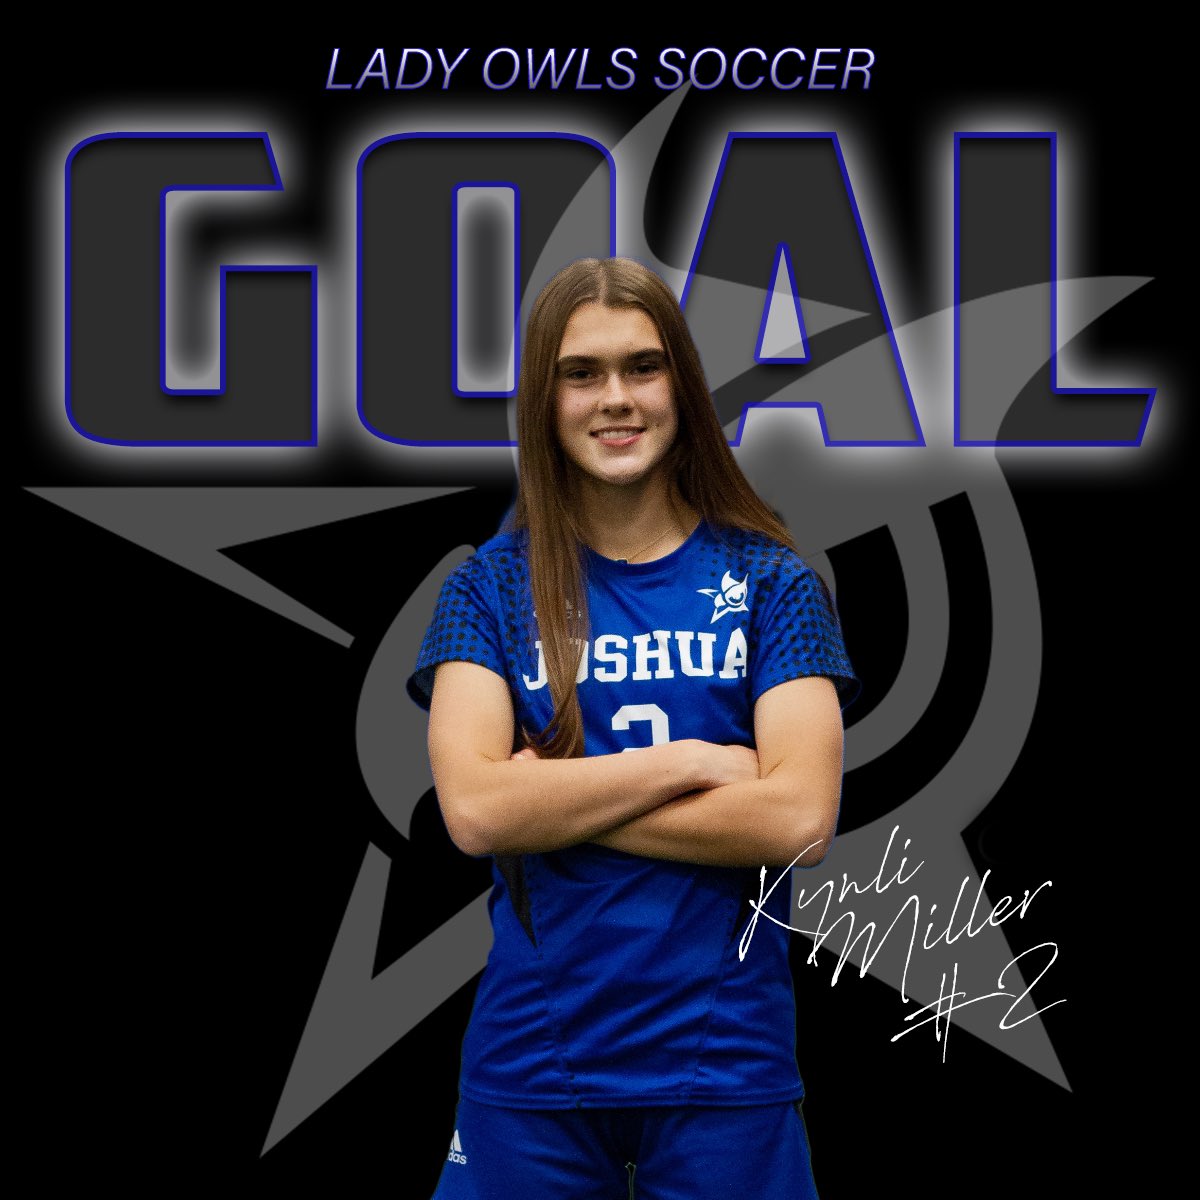 GOAL!! 1-0 10 minutes left in the first half. 🦉⚽️💙